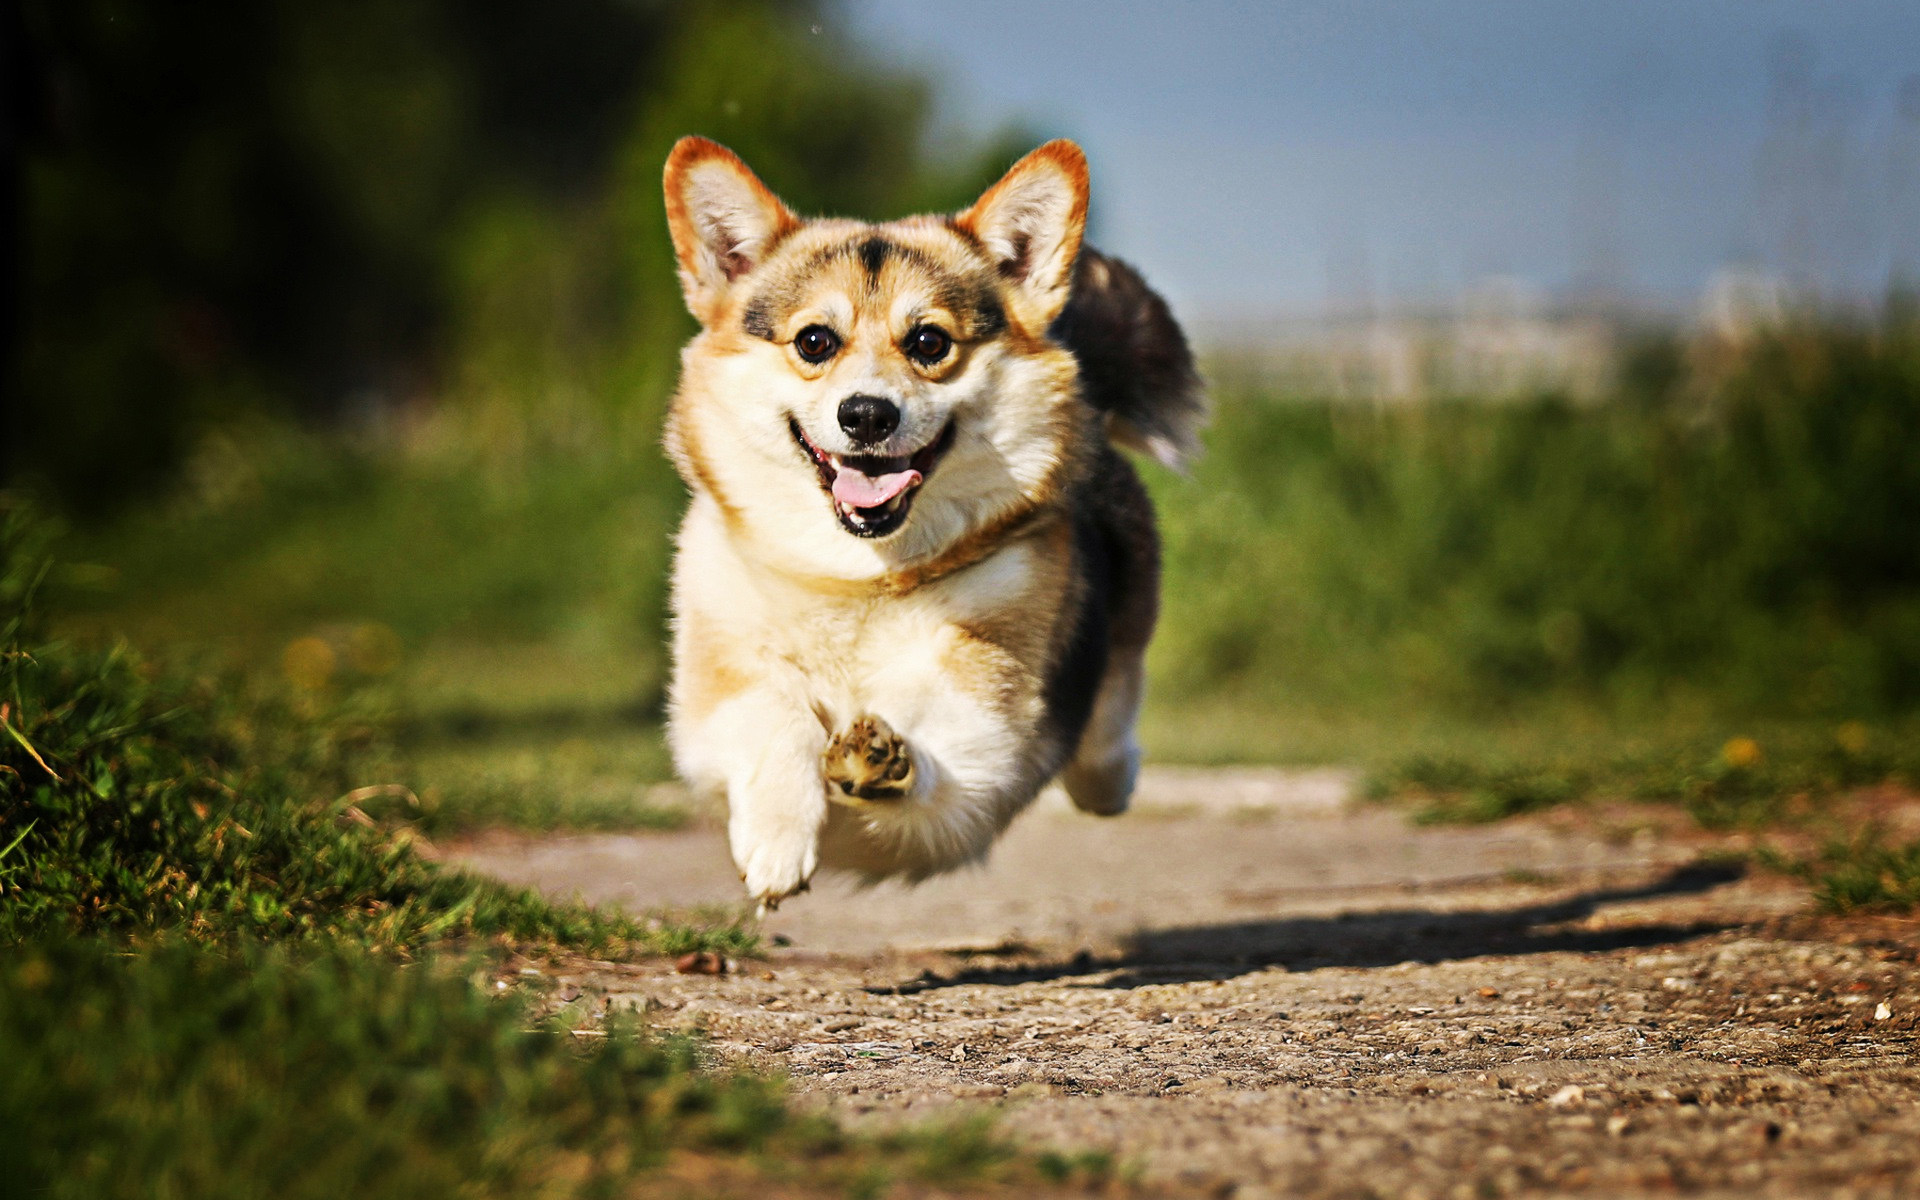 Download Wallpaper Jumping Corgi, Bokeh, Pets, Welsh Corgi, Dogs, Summer, Close Up, Cute Dog, Welsh Corgi Dog, HDR, Corgi, Pembroke Welsh Corgi For Desktop With Resolution 1920x1200. High Quality HD Picture Wallpaper